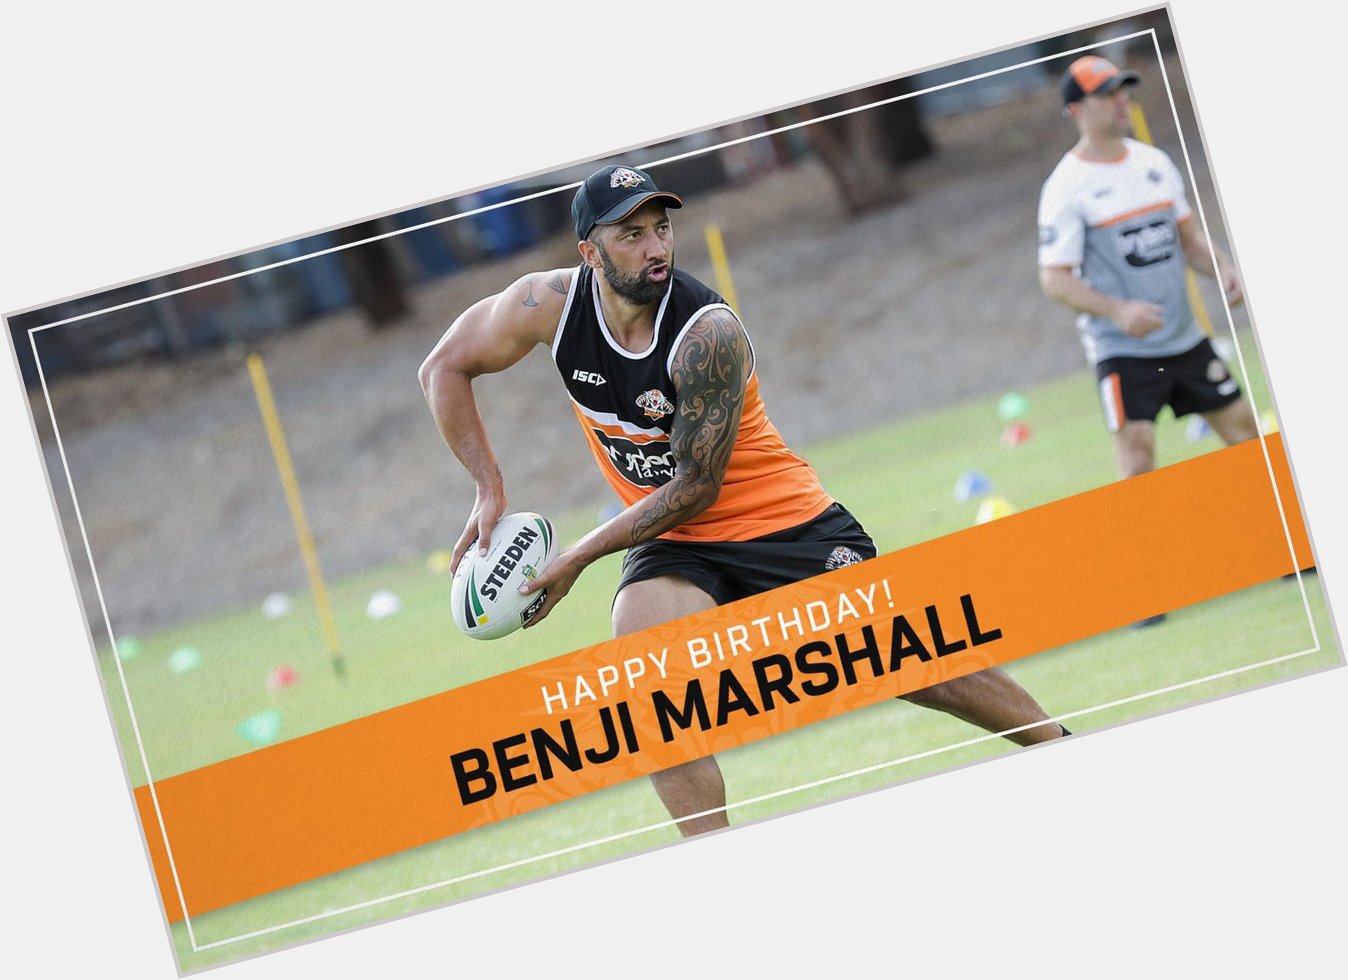 We re wishing a huge happy birthday to Life Member Benji Marshall! Have a great day, Benj!  